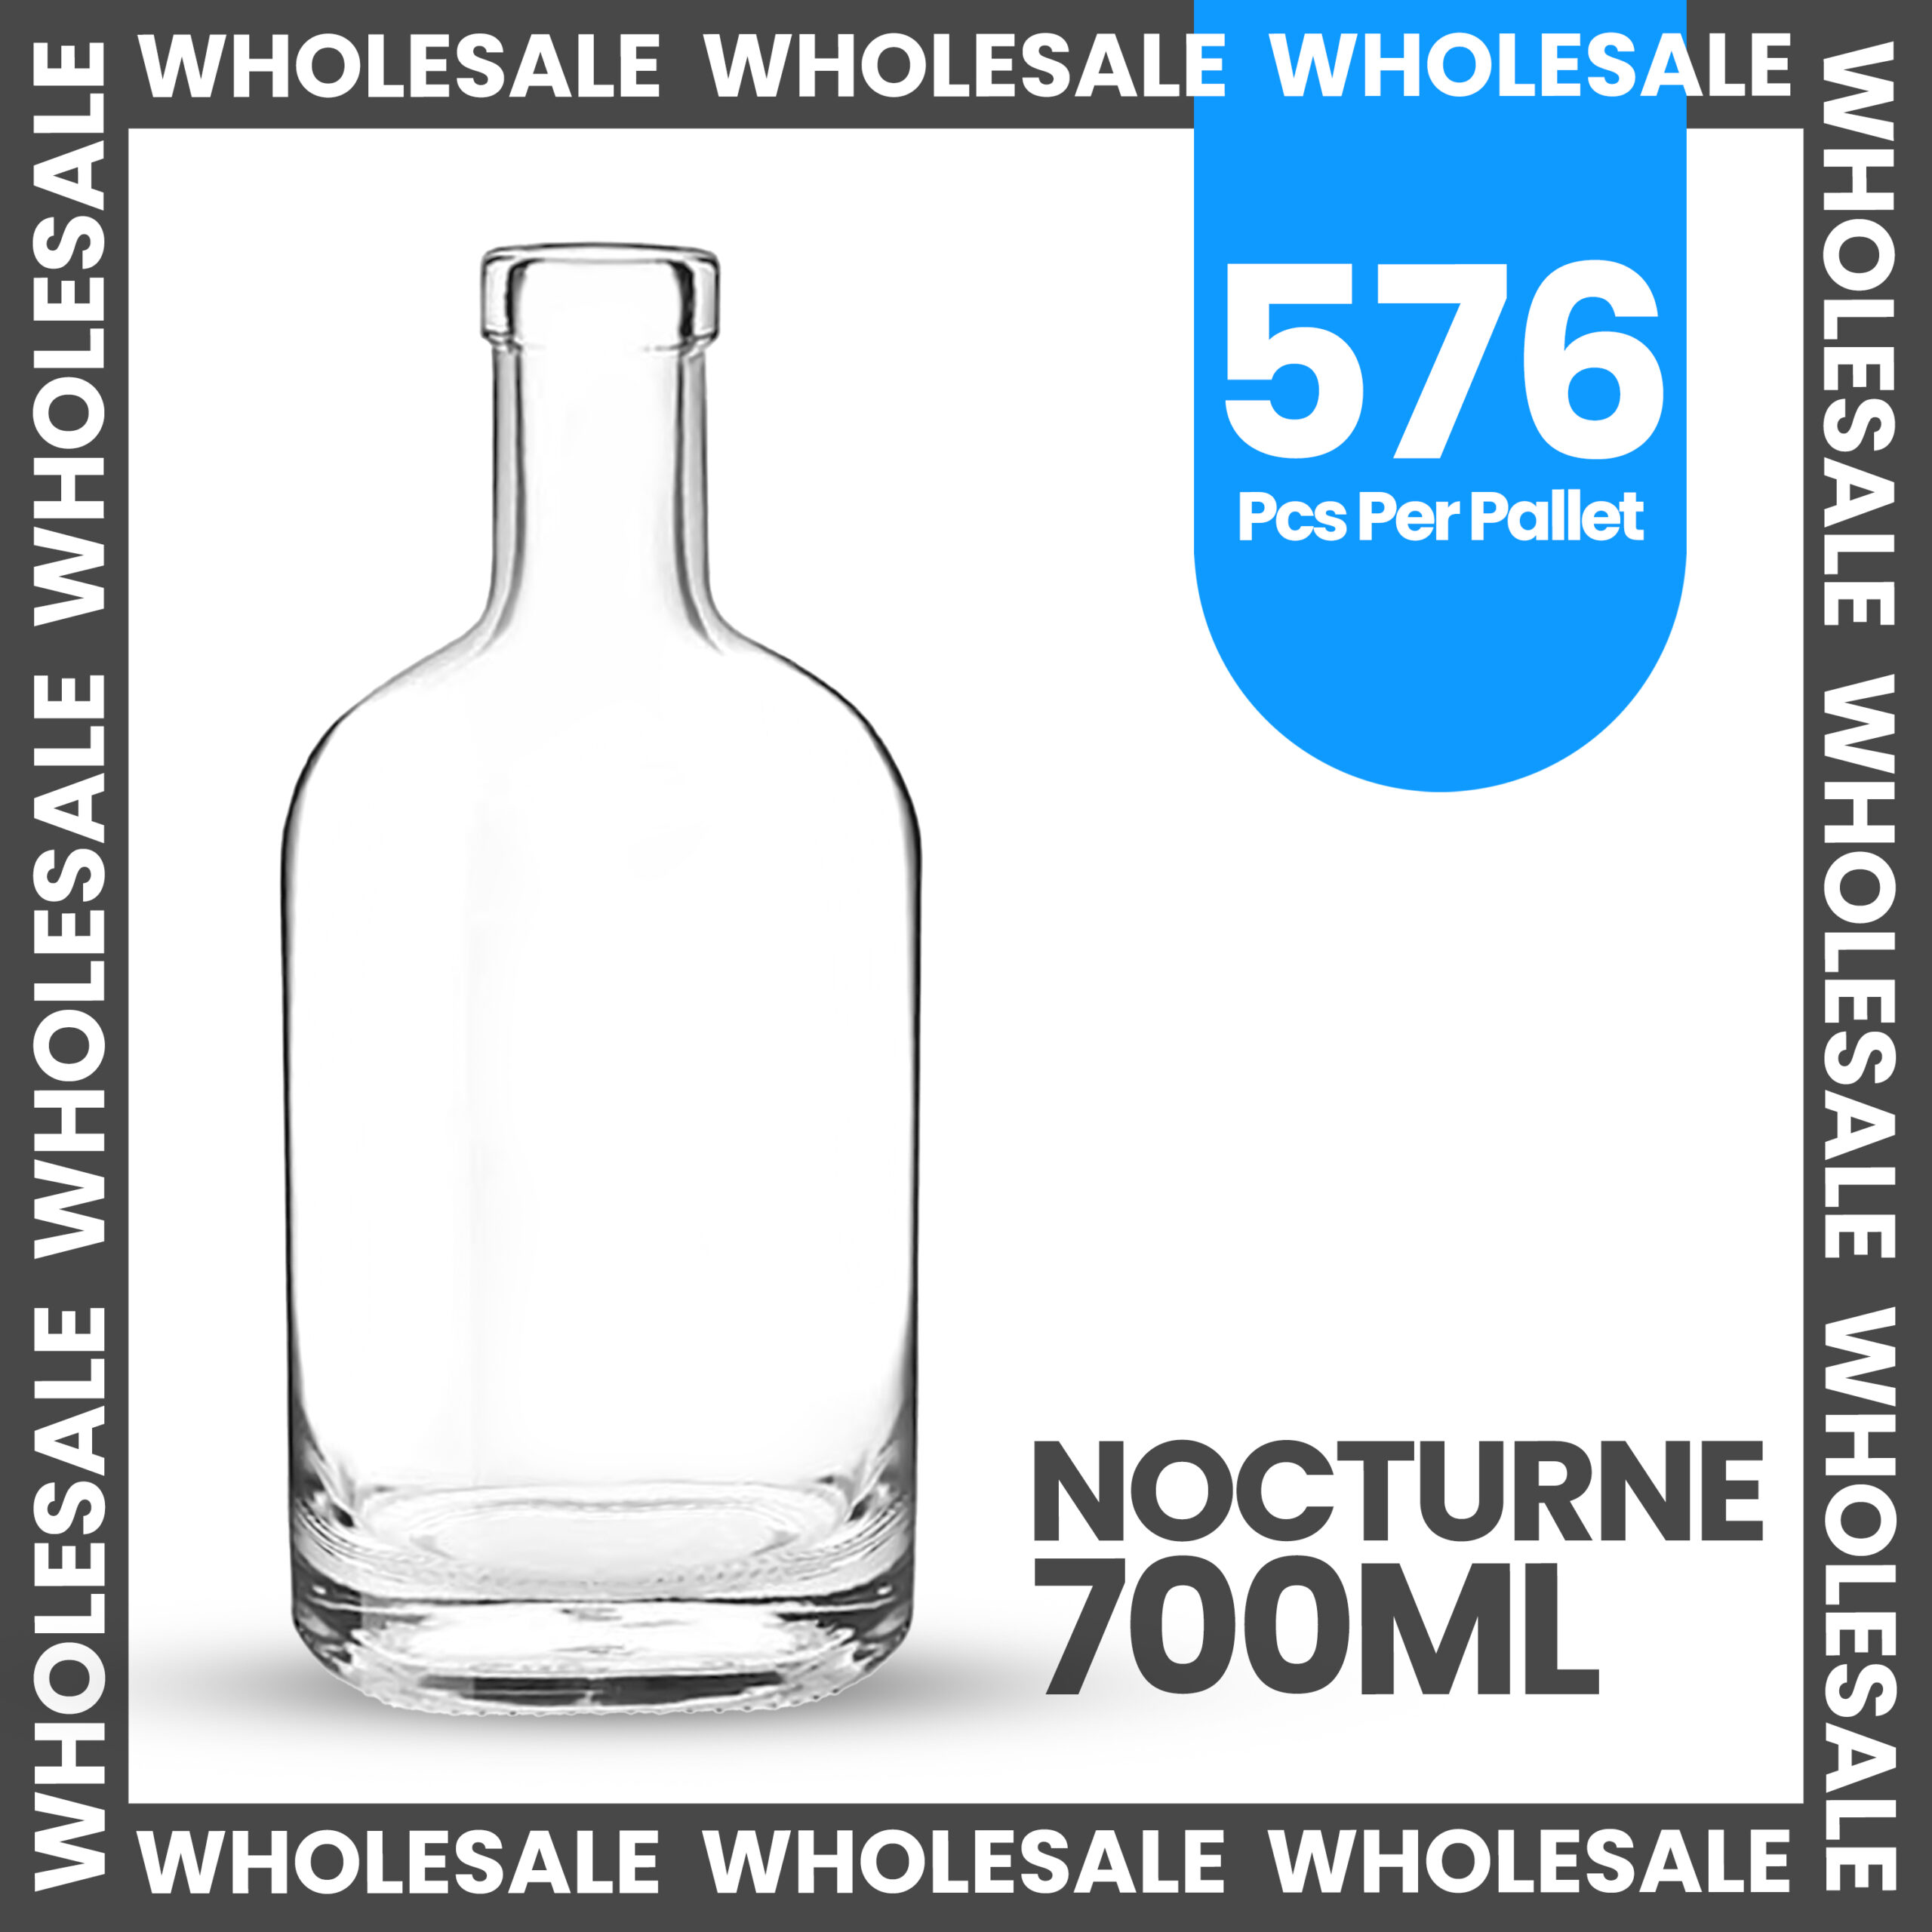 Wholesale word repeated around image as a border. Image is Nocturne 700ml, 576 pcs per pallet.